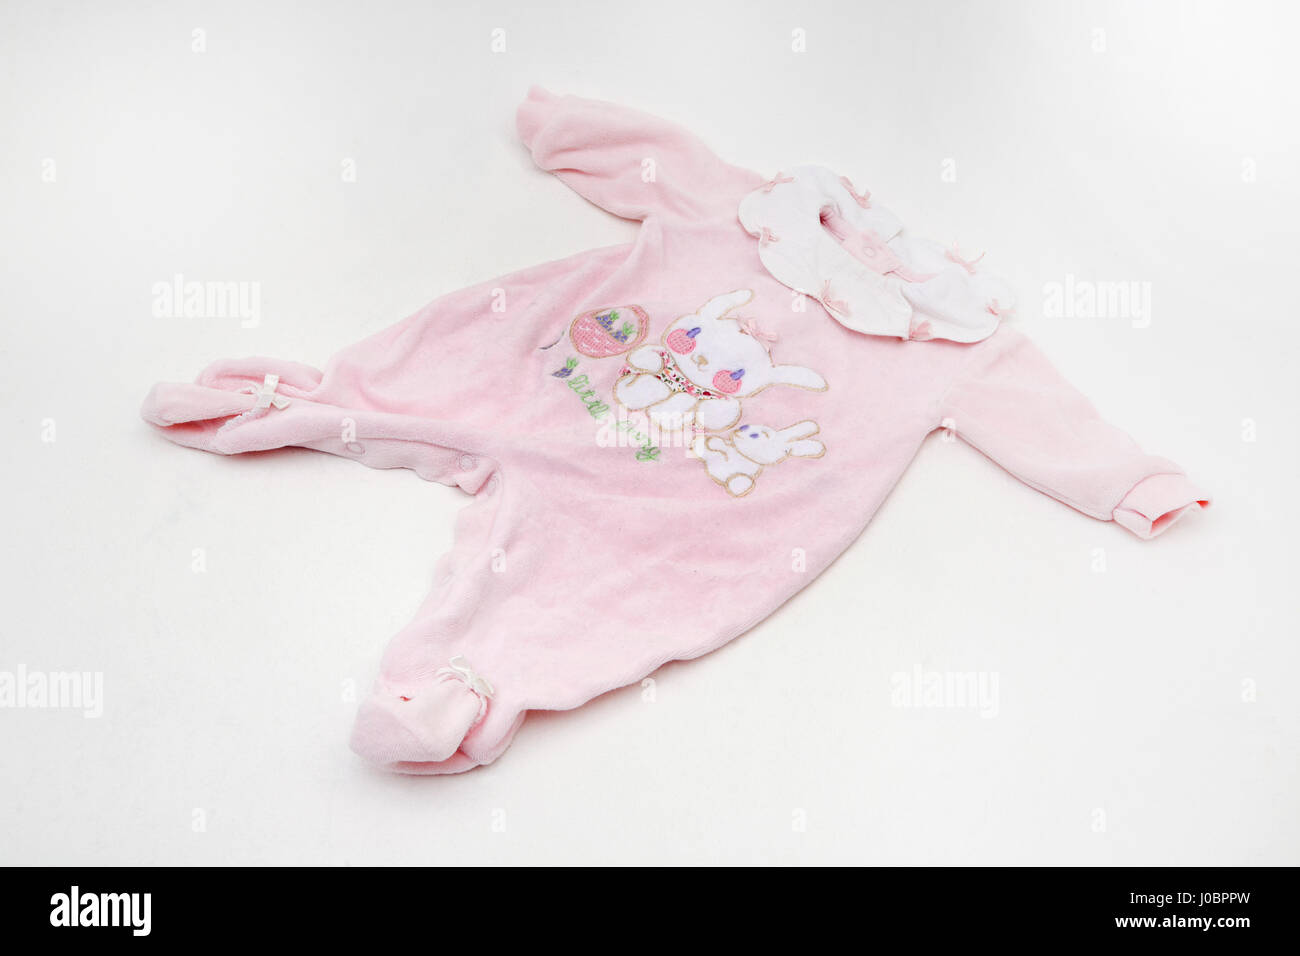 Pink All In One Baby Grow With collar and a Rabbit design Stock Photo